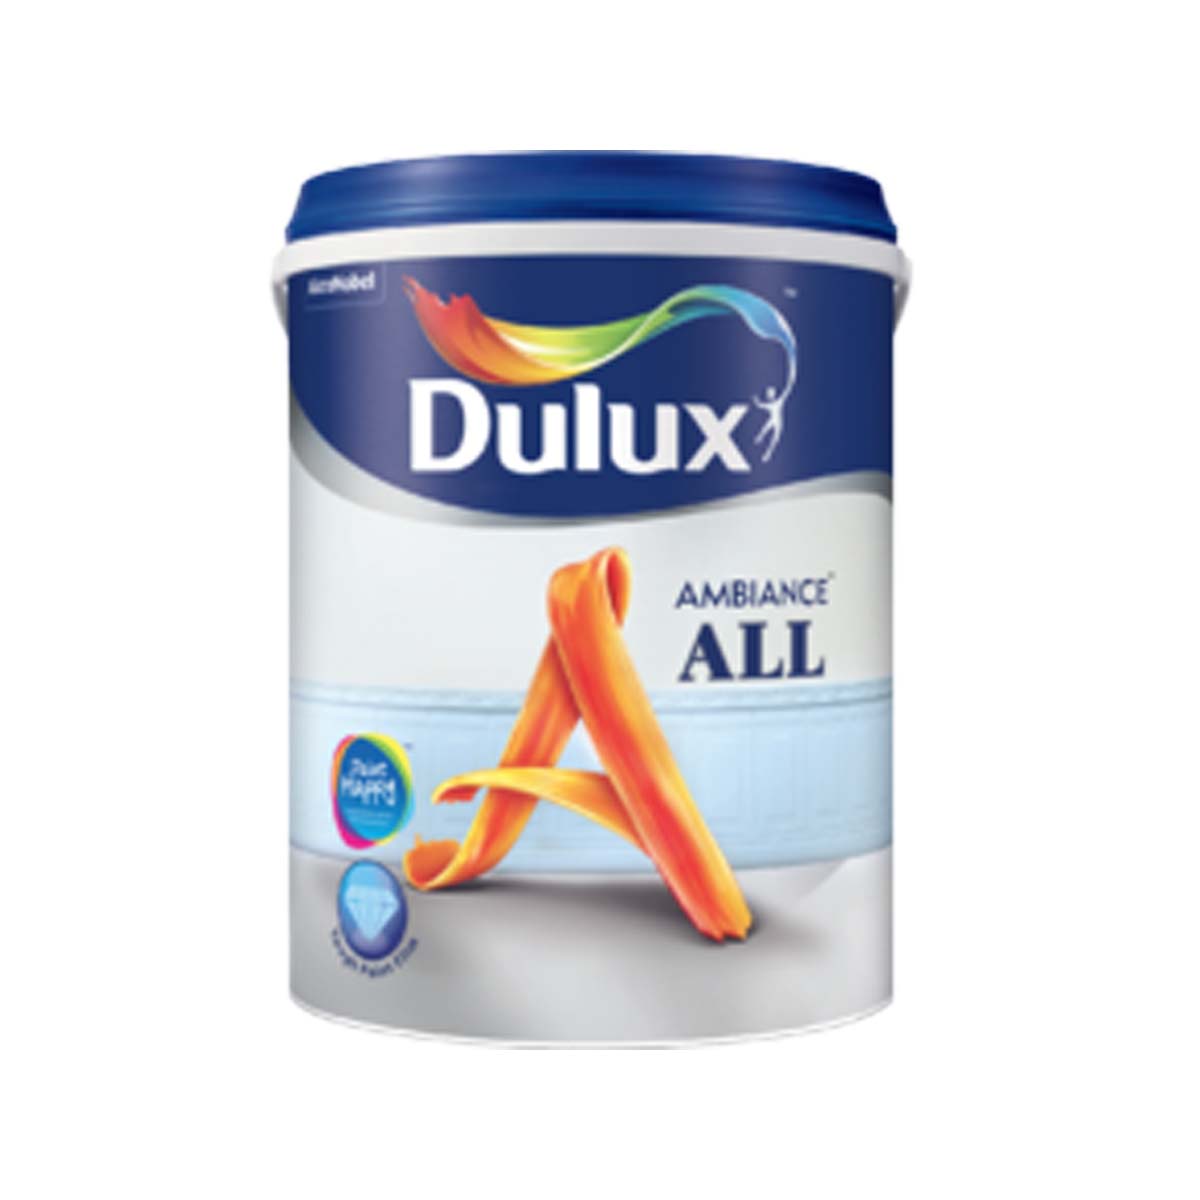 Best Dulux White Paint for Interior Walls in Singapore